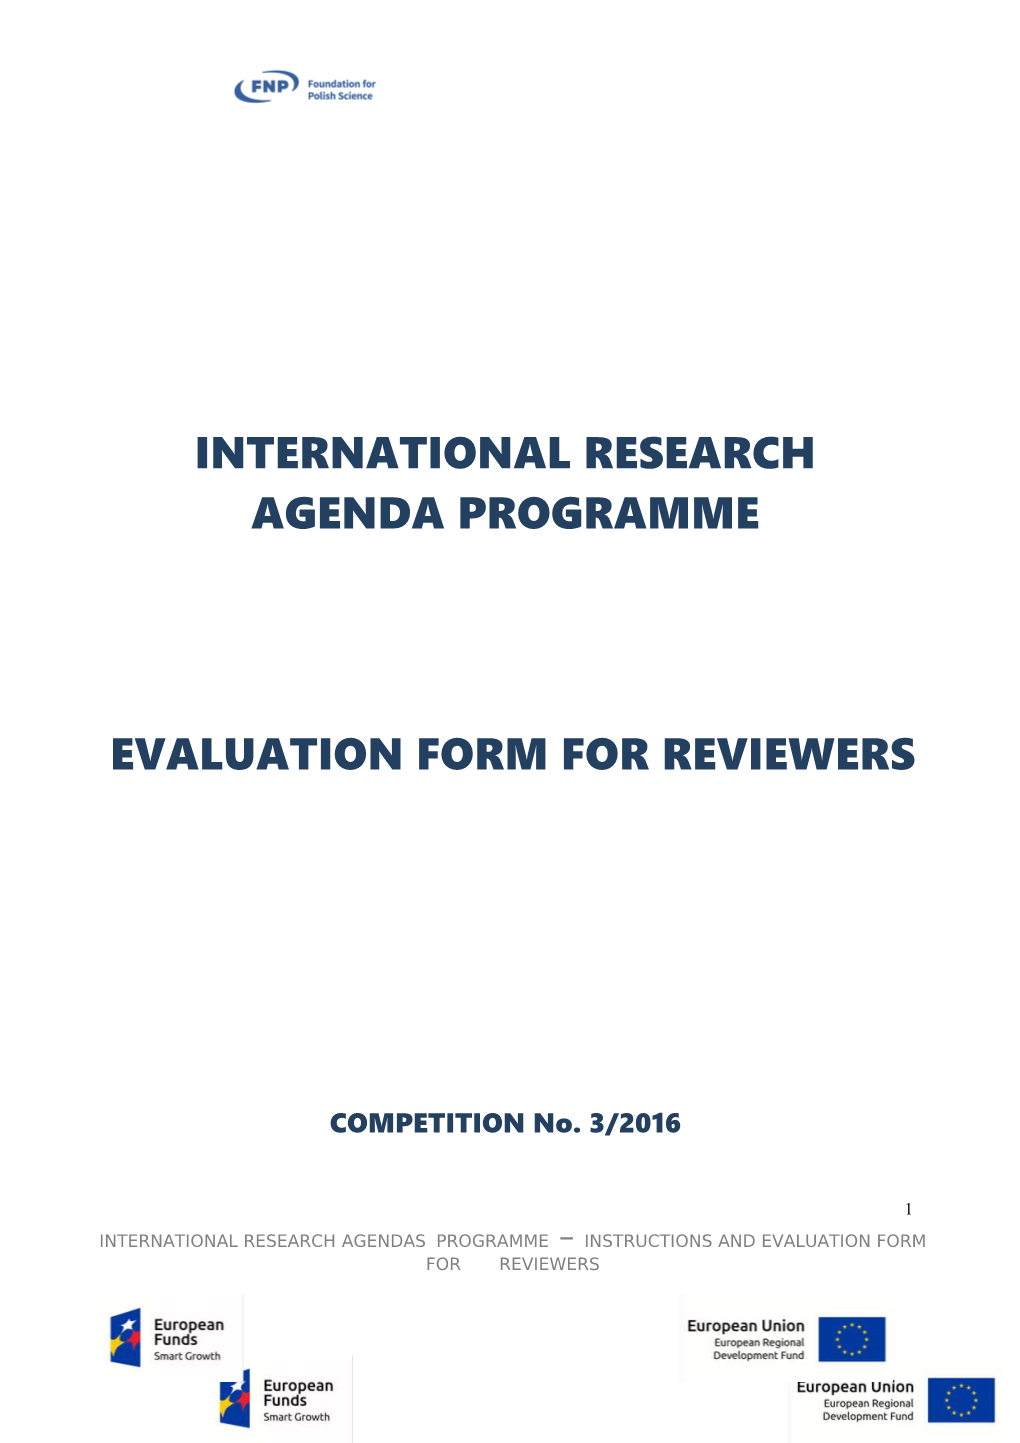 Evaluation Form for Reviewers